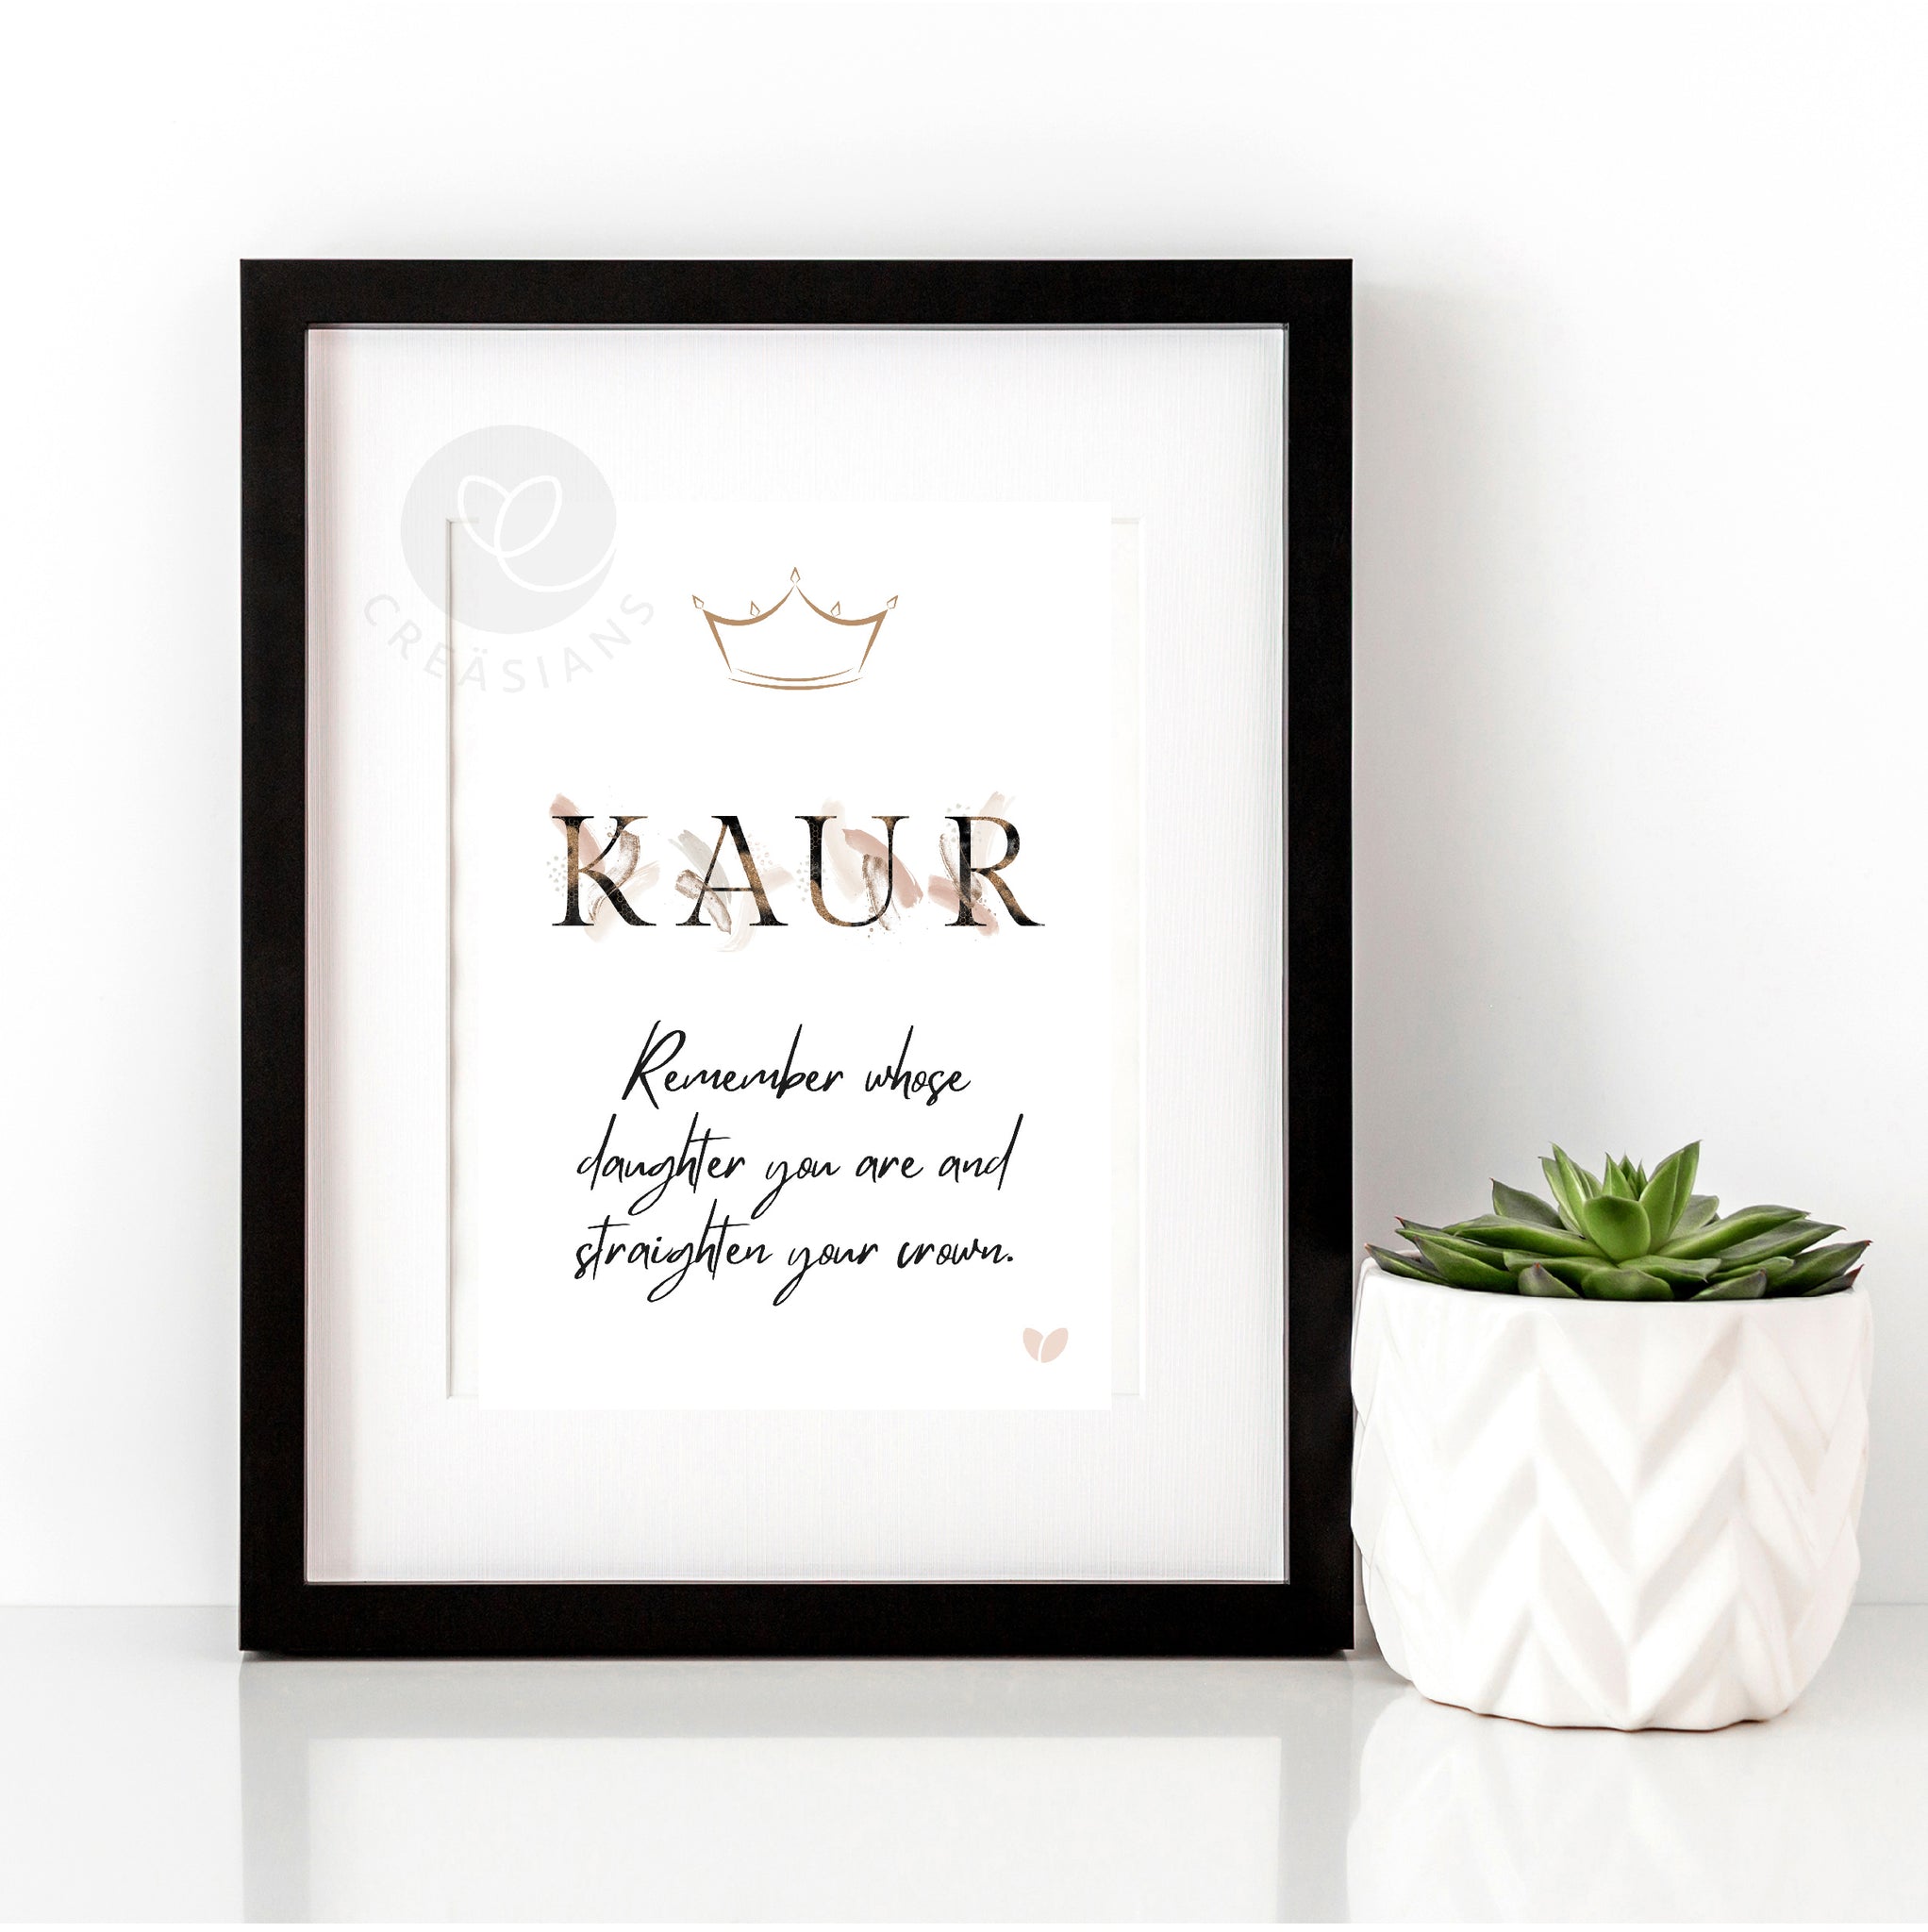 KAUR Wall print - Remember whose daughter you are and straighten your corwn - Kaur art - Sikh prints - Sikh nursery print